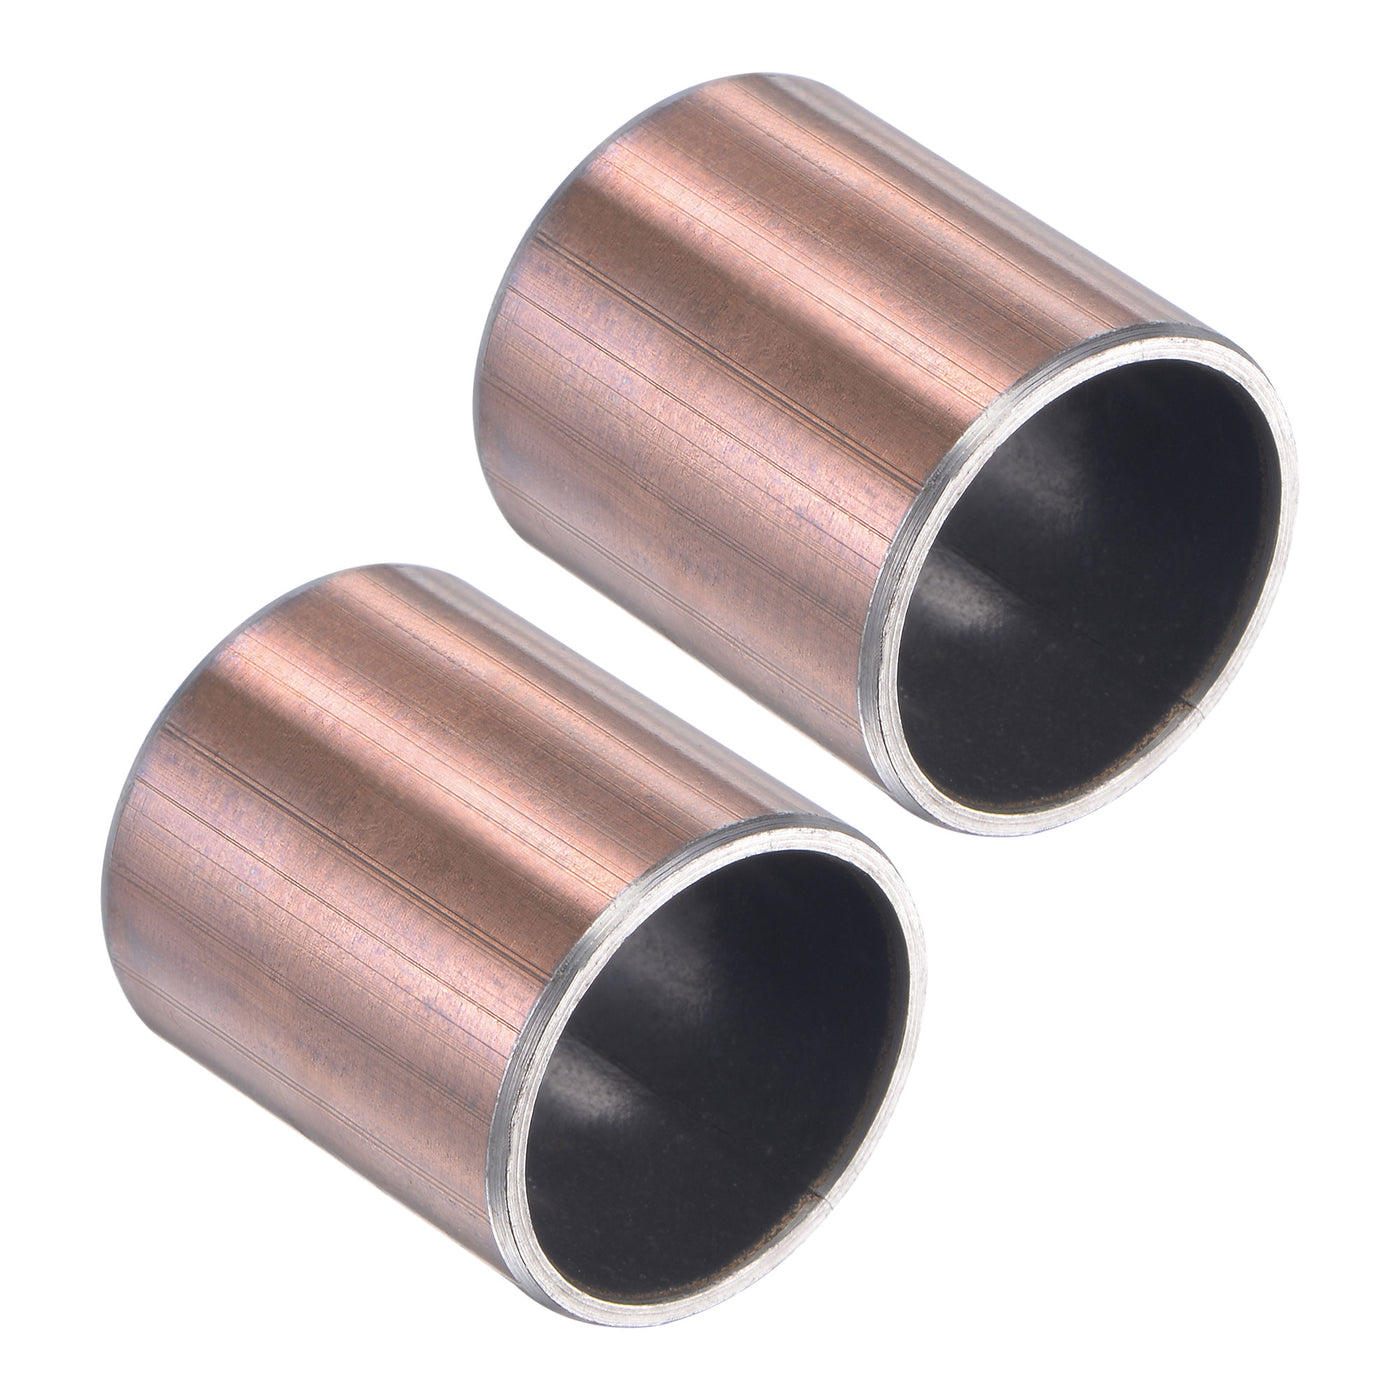 uxcell Uxcell Sleeve (Plain) Bearings 3/4" x 7/8" x 1" Wrapped Oilless Bushings 2pcs